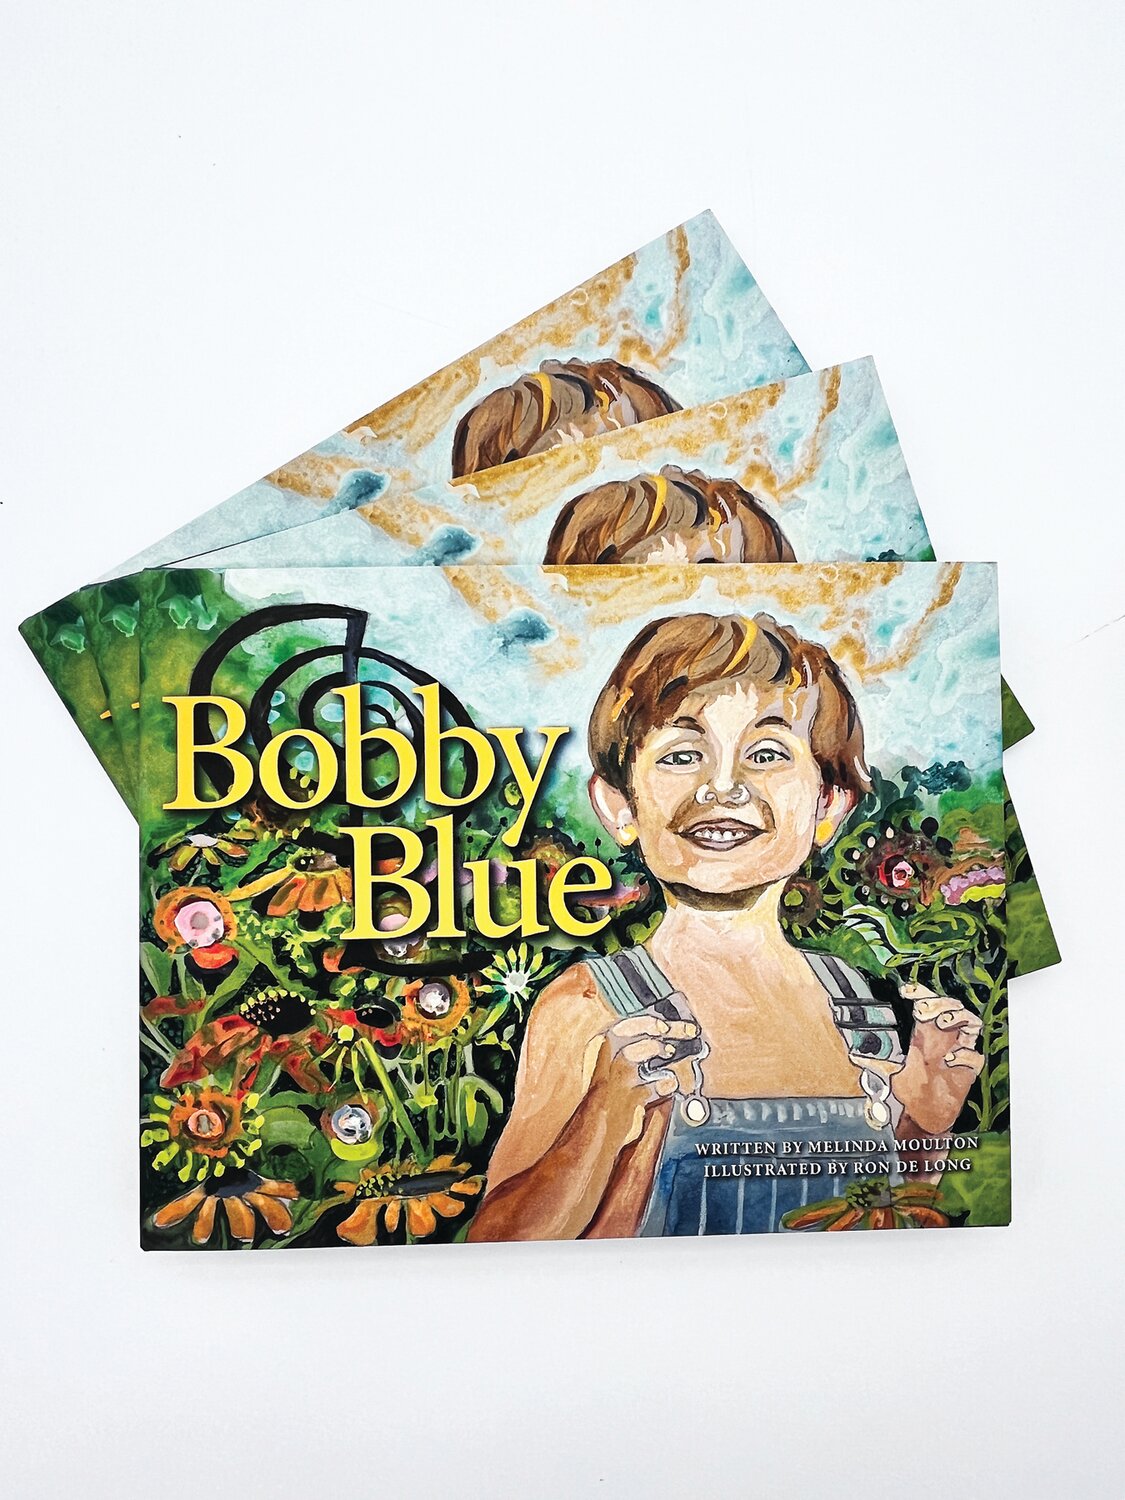 “Bobby Blue” is among the handmade gifts for sale at The Baum School of Art’s Handmade Holiday Gift Shop.